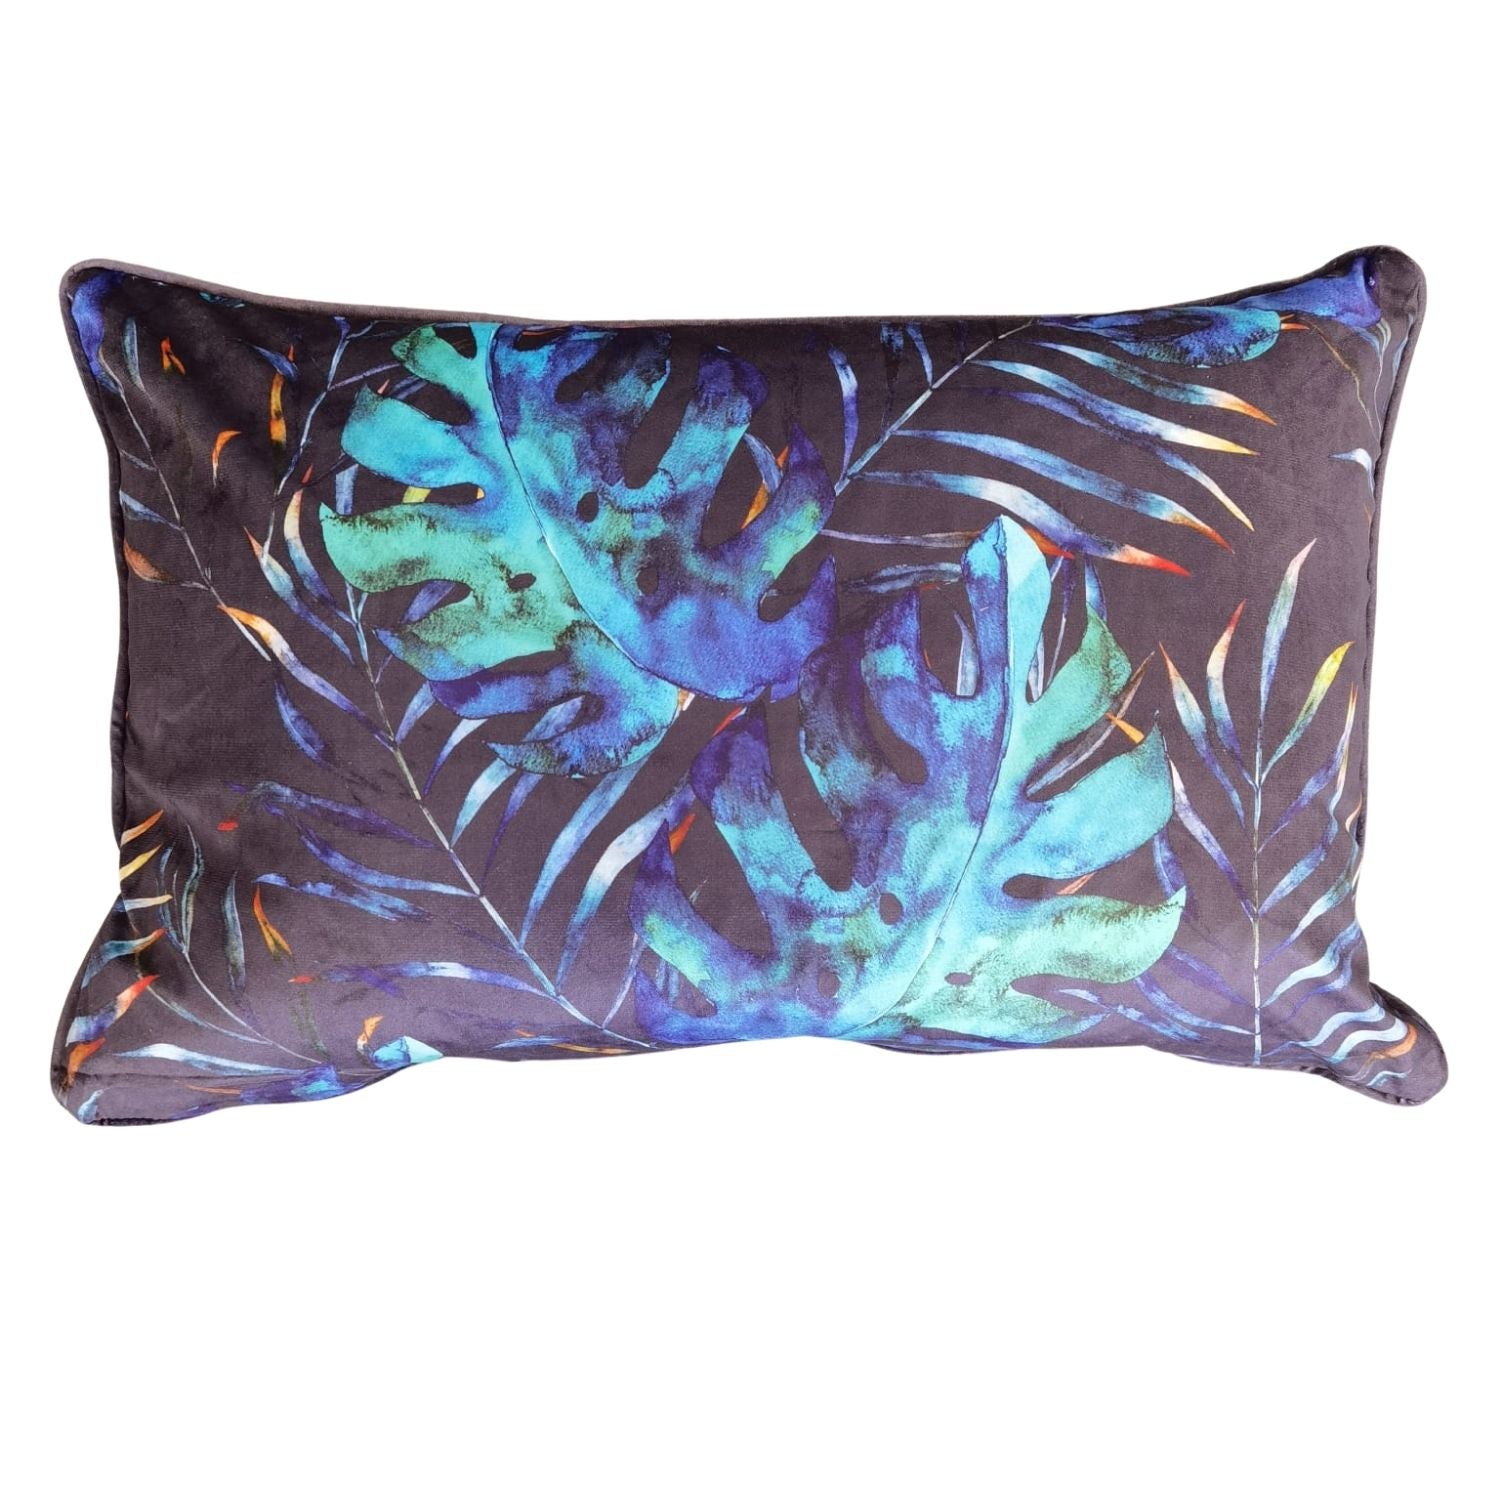 The Home Living Room Printed Piped Cushion - Blue 1 Shaws Department Stores